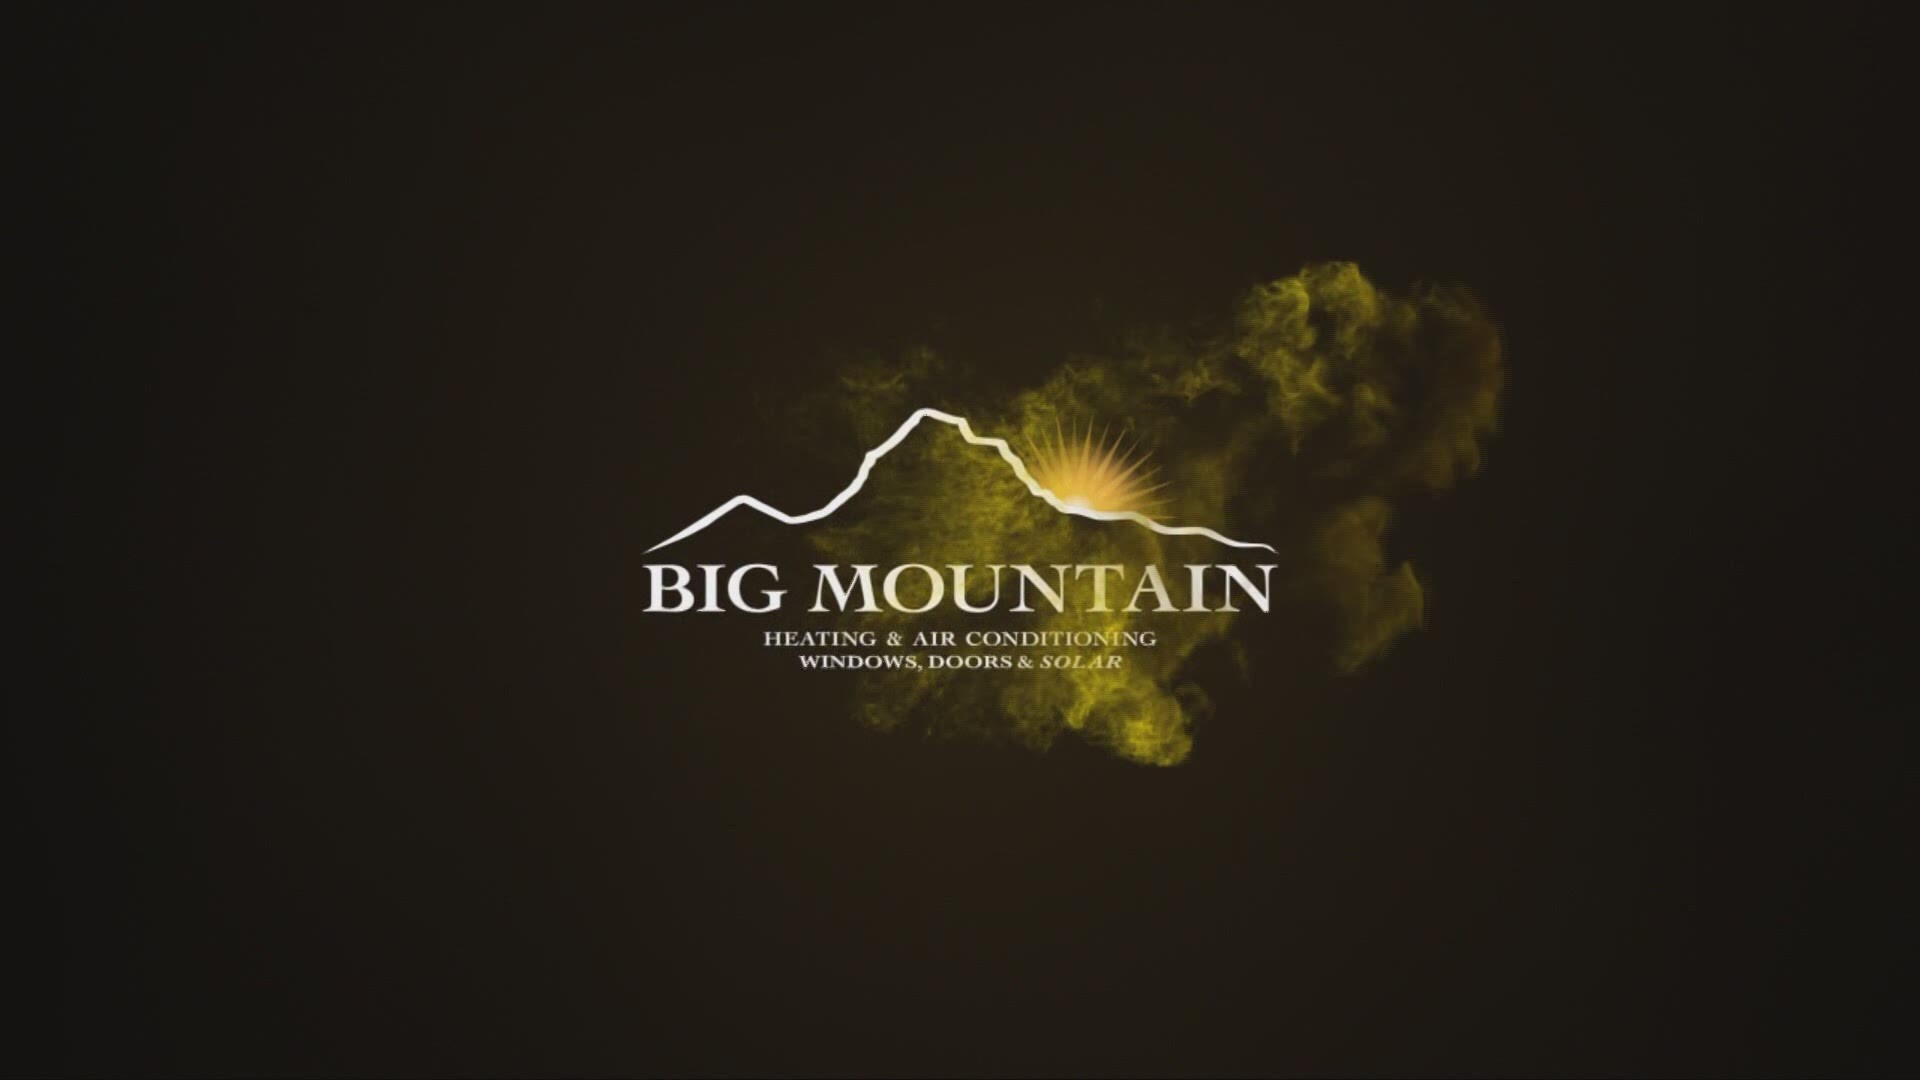 Big Mountain Heating and Air can help keep you comfortable at home, while saving on your next energy bill. The following is a paid segment for Big Mountain.